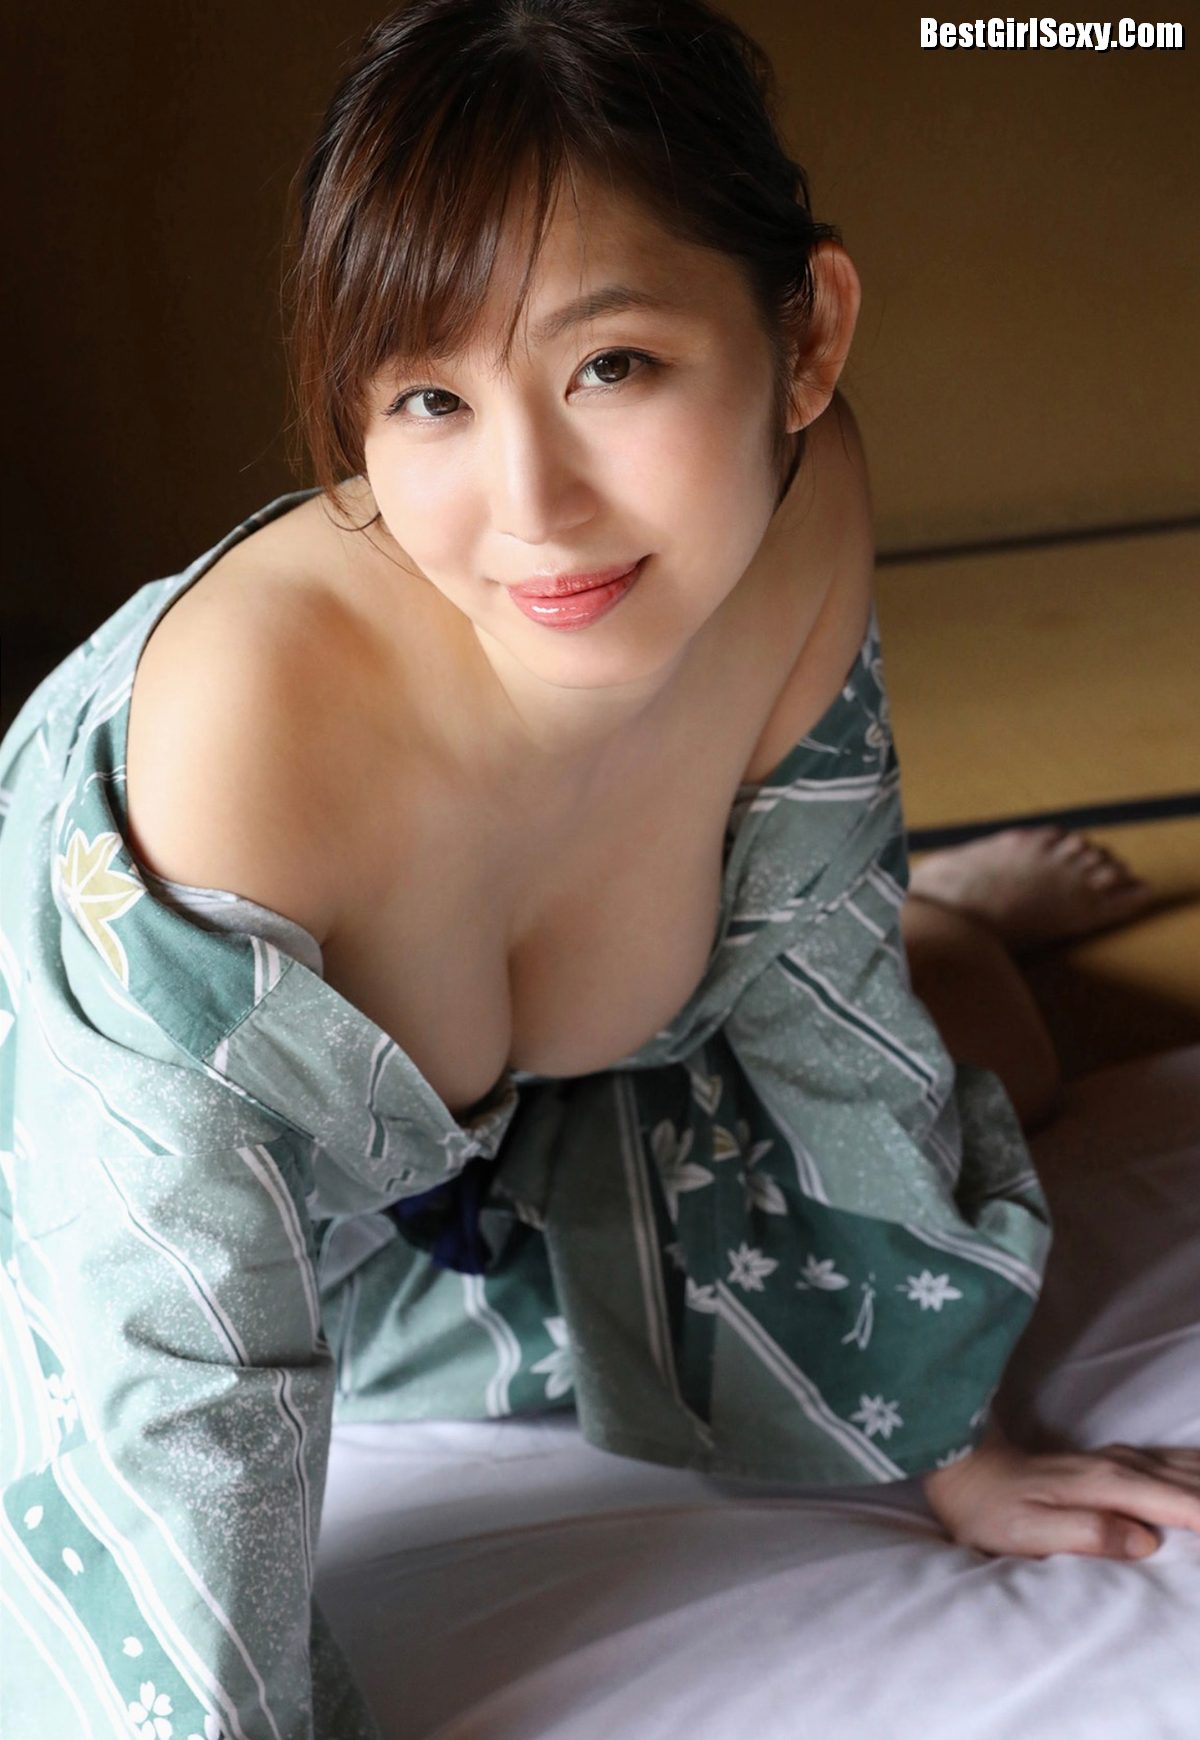 FRIDAY Misumi Shiochi 塩地美澄 One Night And Two Days A Special Journey Vol 3 0086 9502522481.jpg